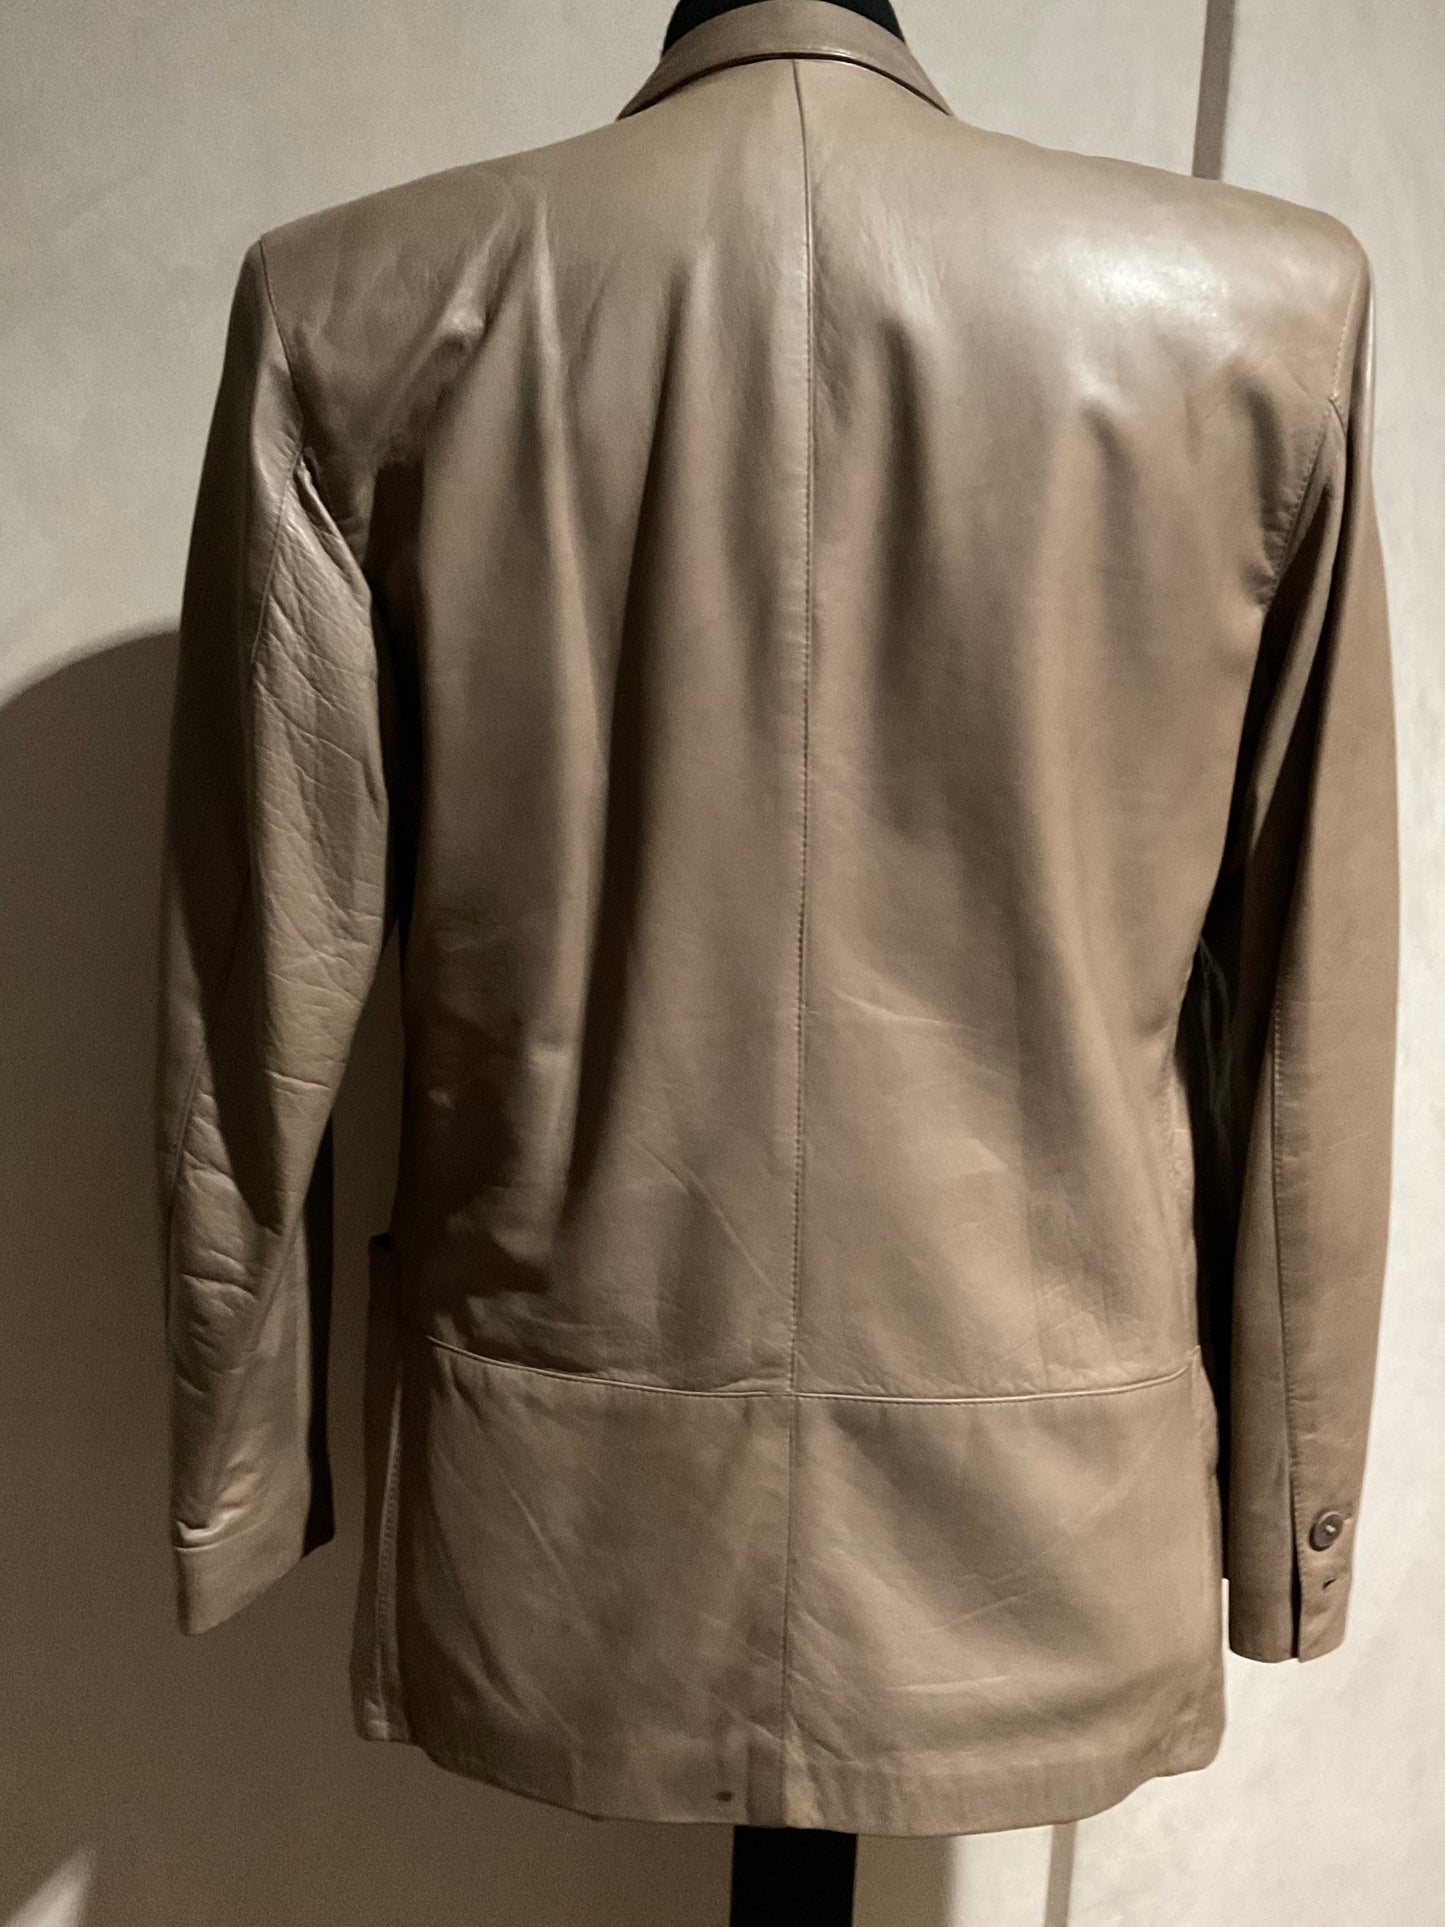 R P LEATHER DOUBLE BREASTED JACKET / TAUPE / MEDIUM / MADE IN ITALY